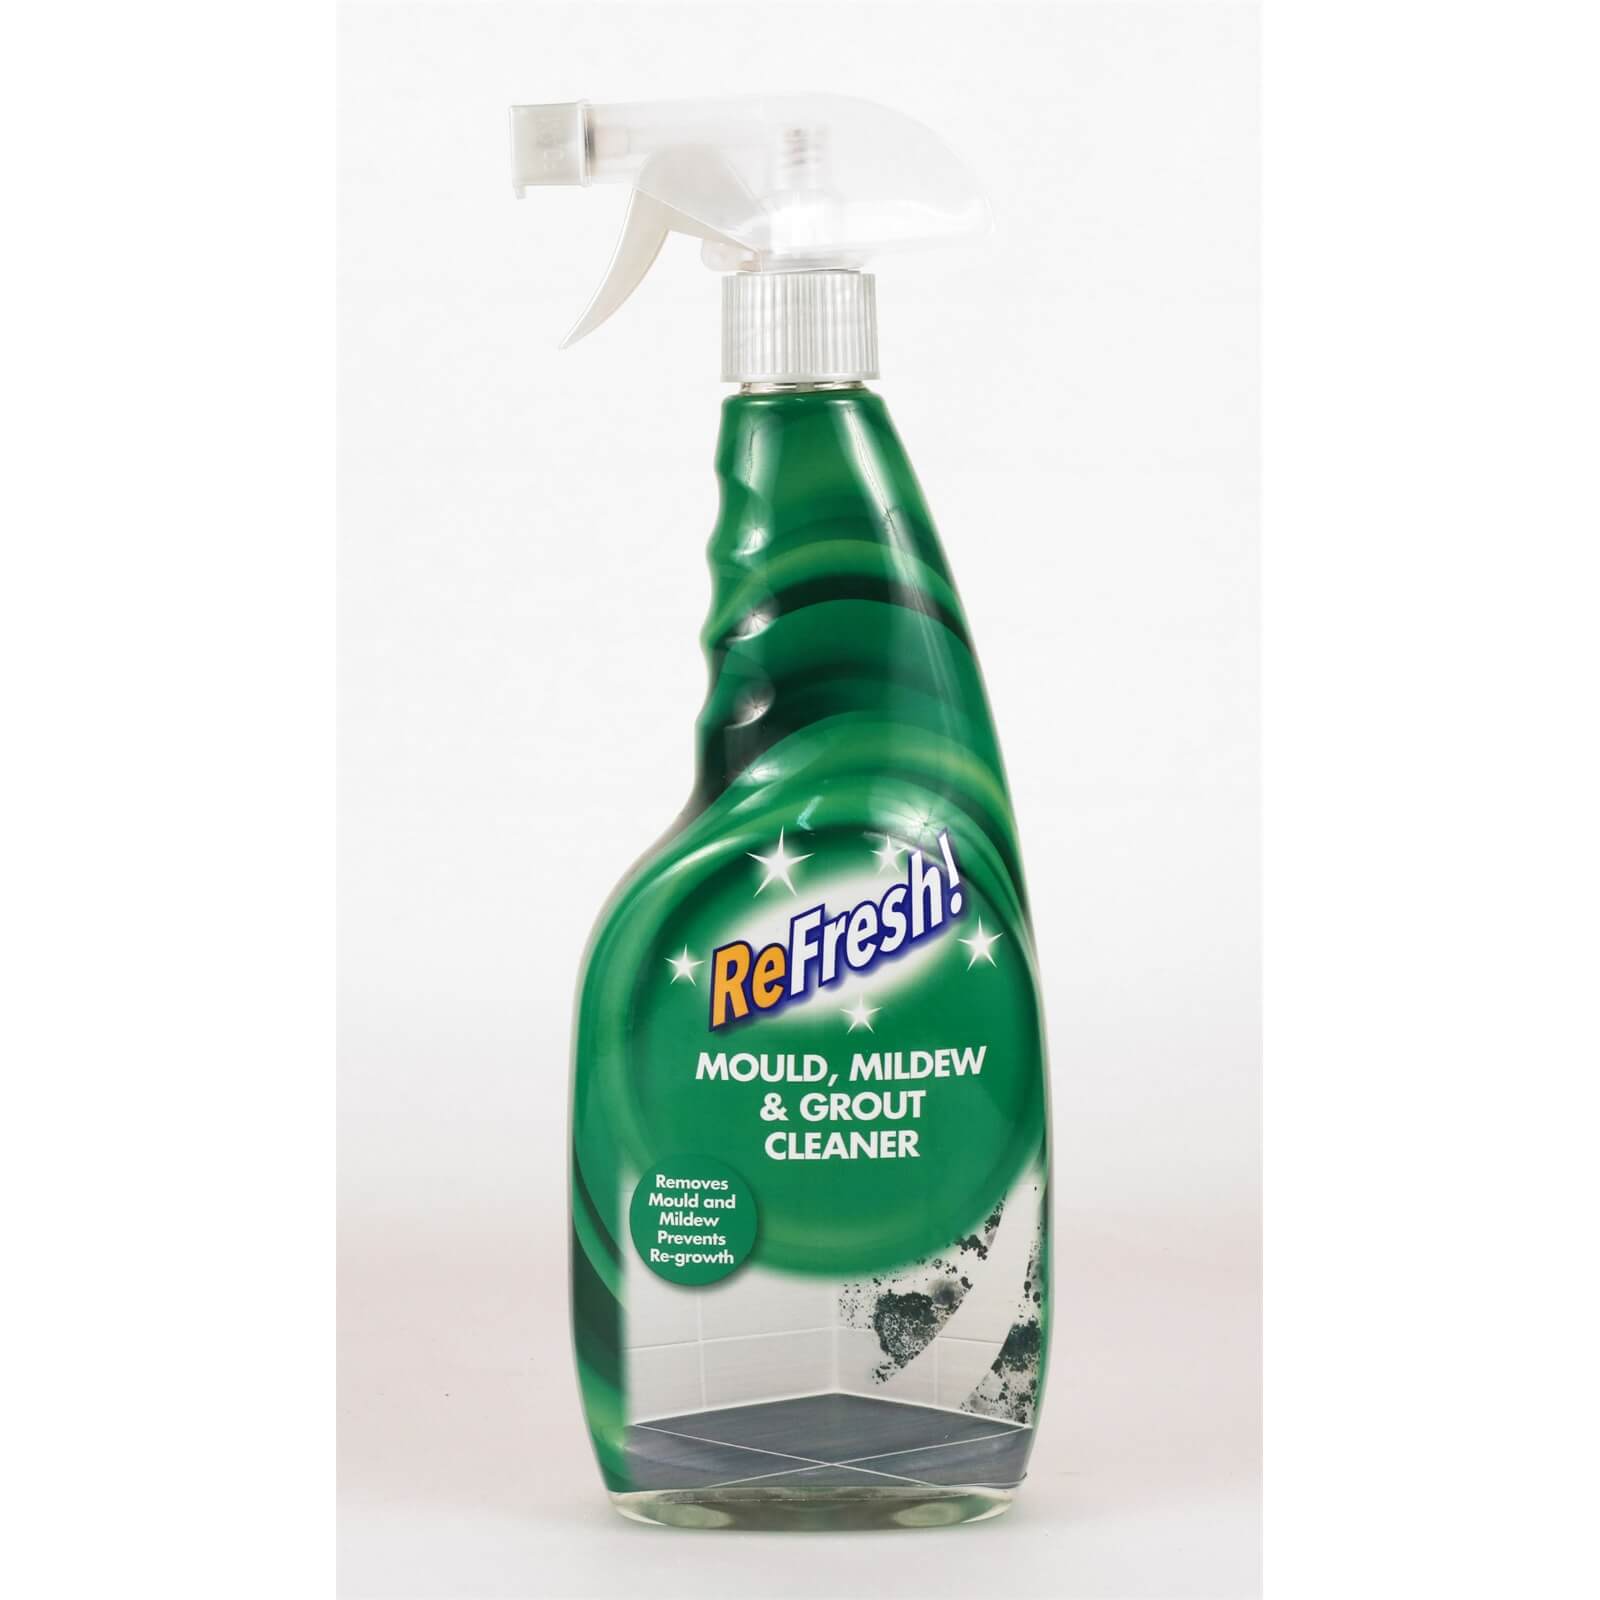 Refresh Mould, Mildew & Grout Cleaner